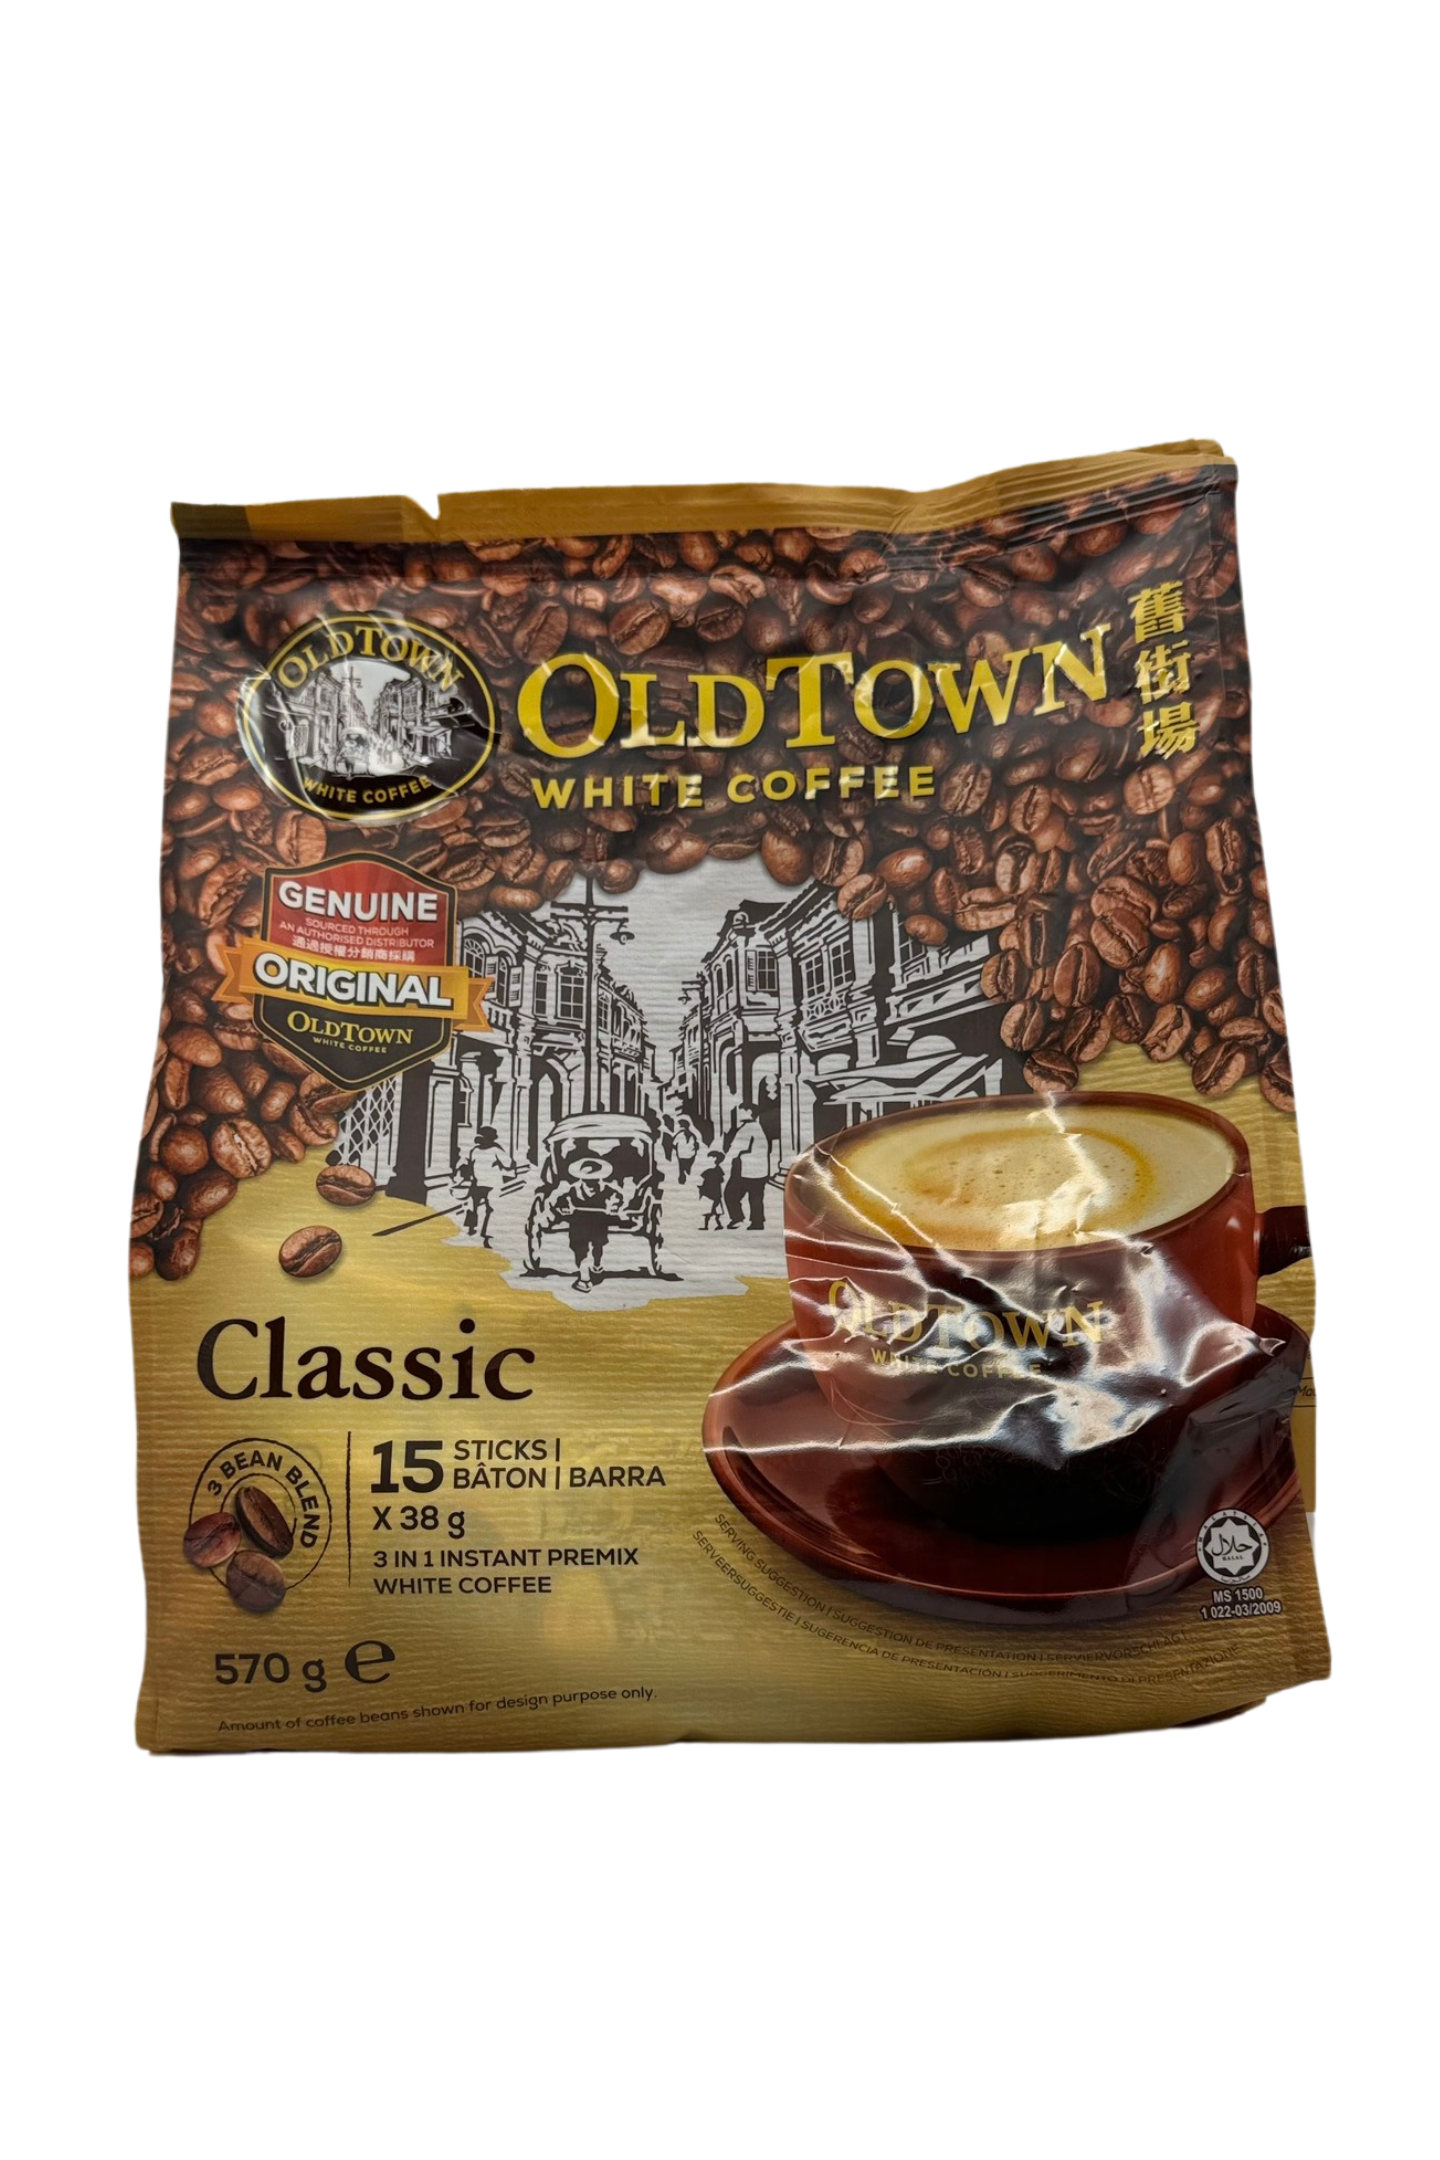 Old Town White Coffee Classic 3in1 570g